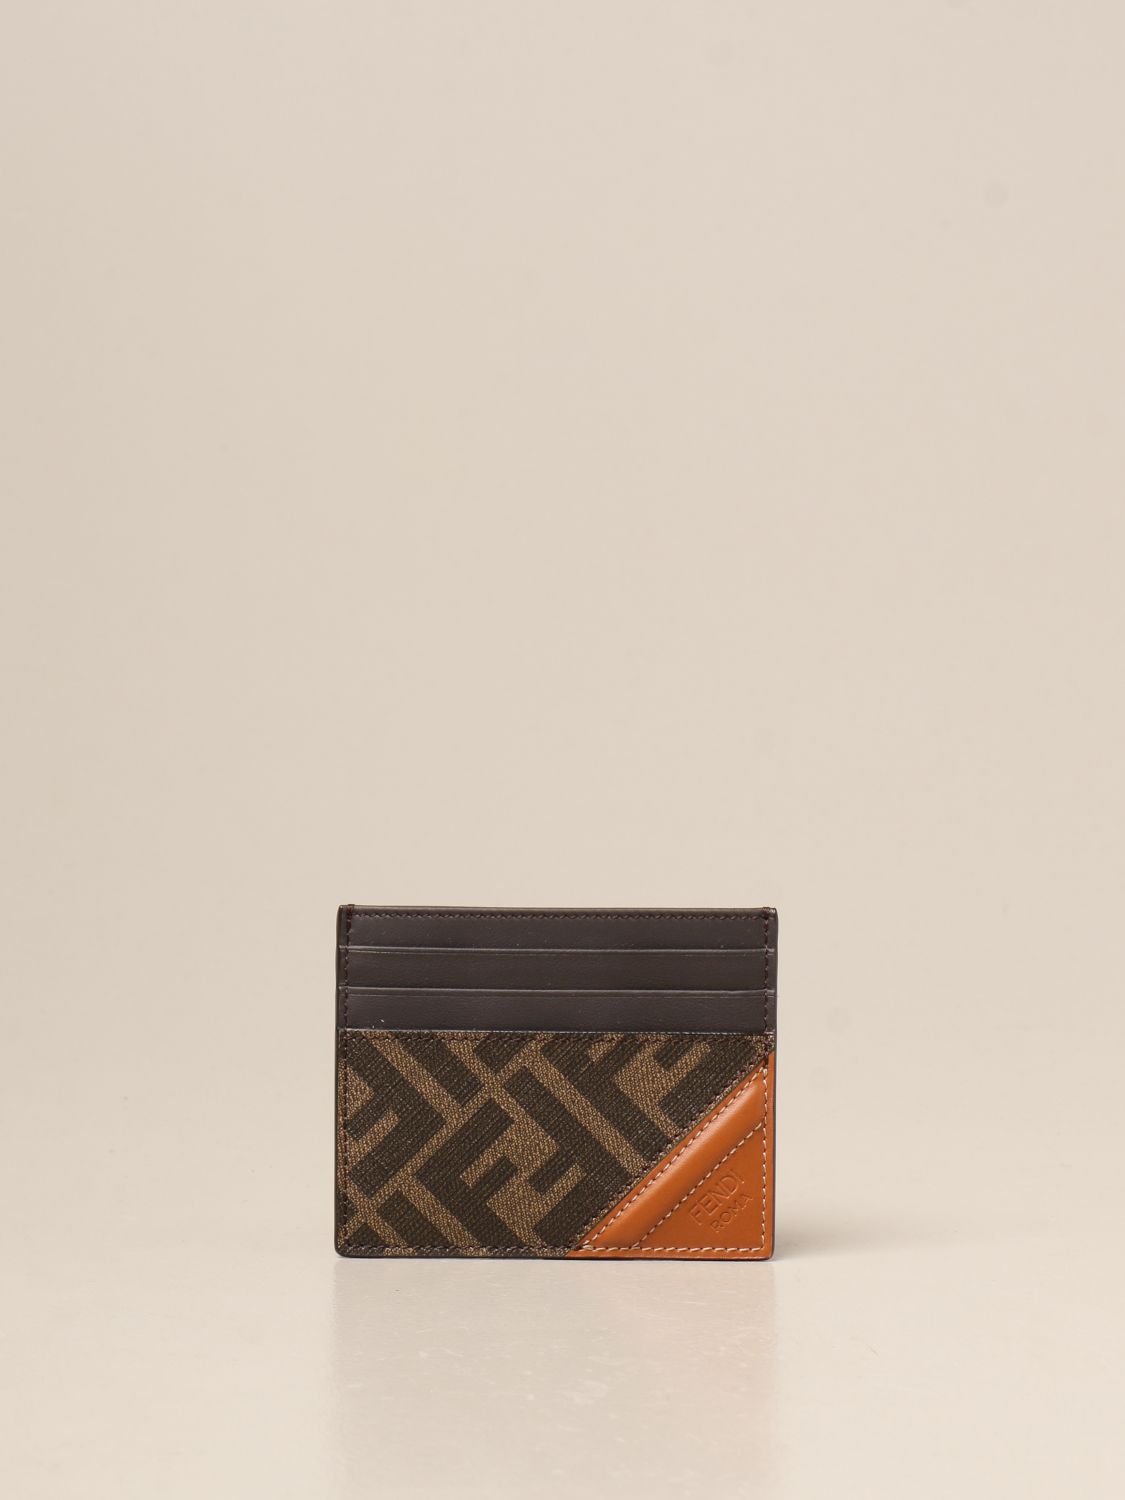 Fendi credit card holder in leather and canvas